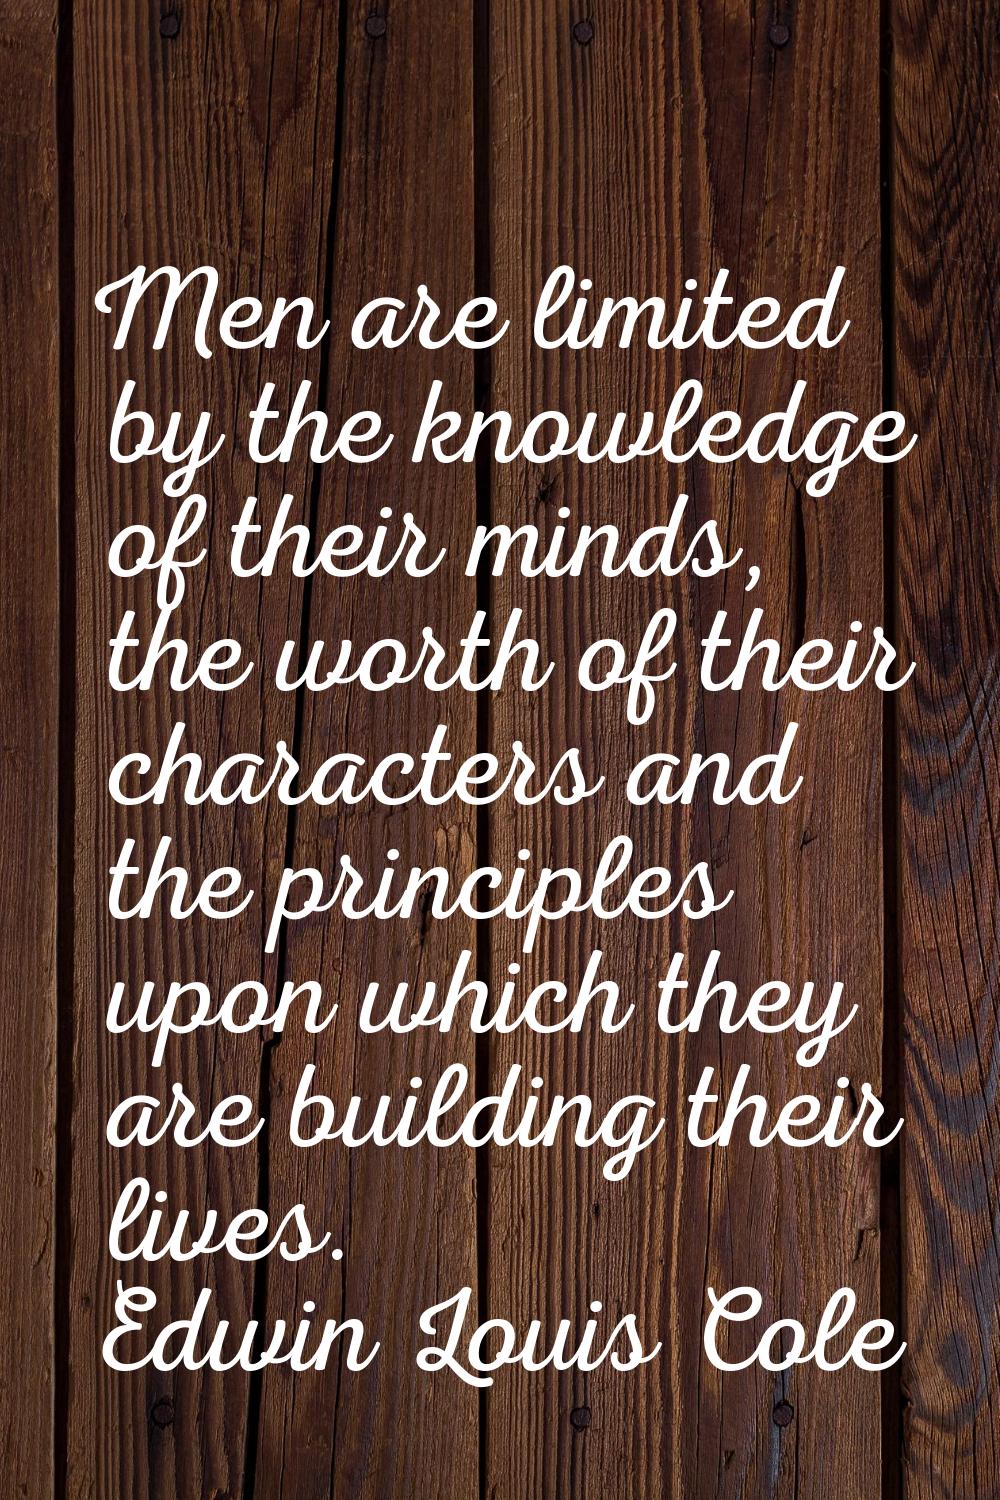 Men are limited by the knowledge of their minds, the worth of their characters and the principles u